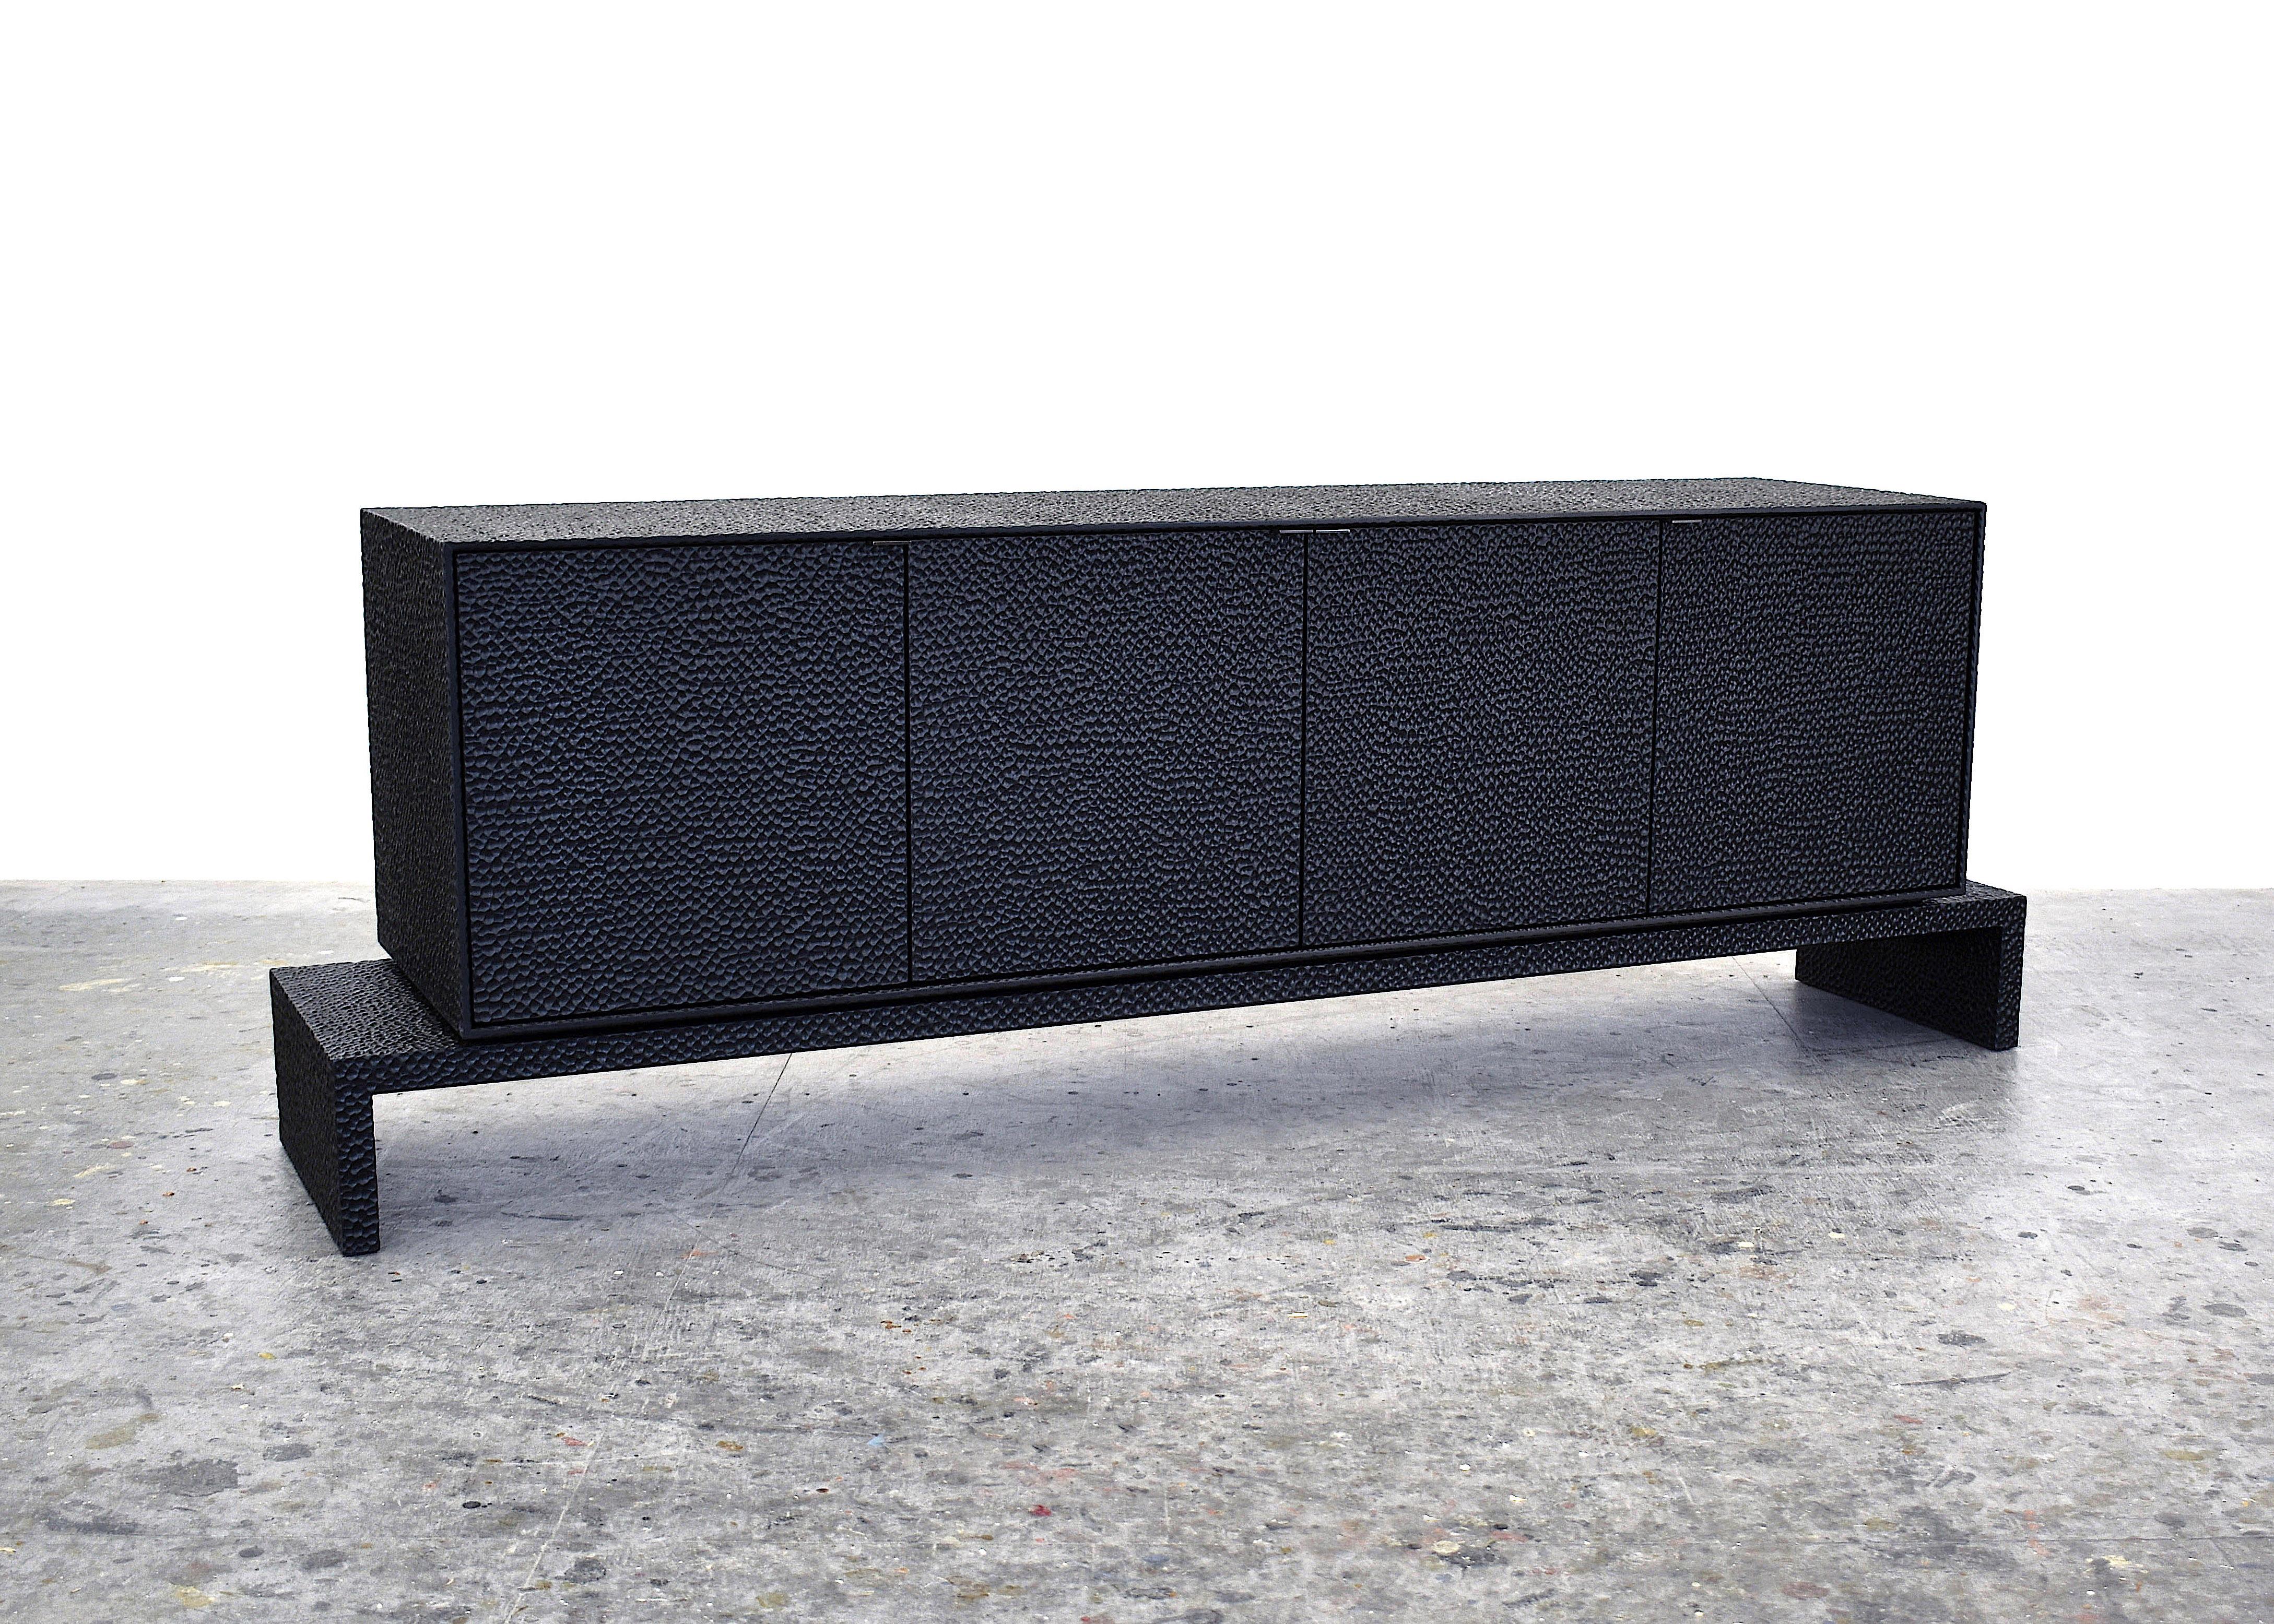 American Credenza Sculpted by John Eric Byers